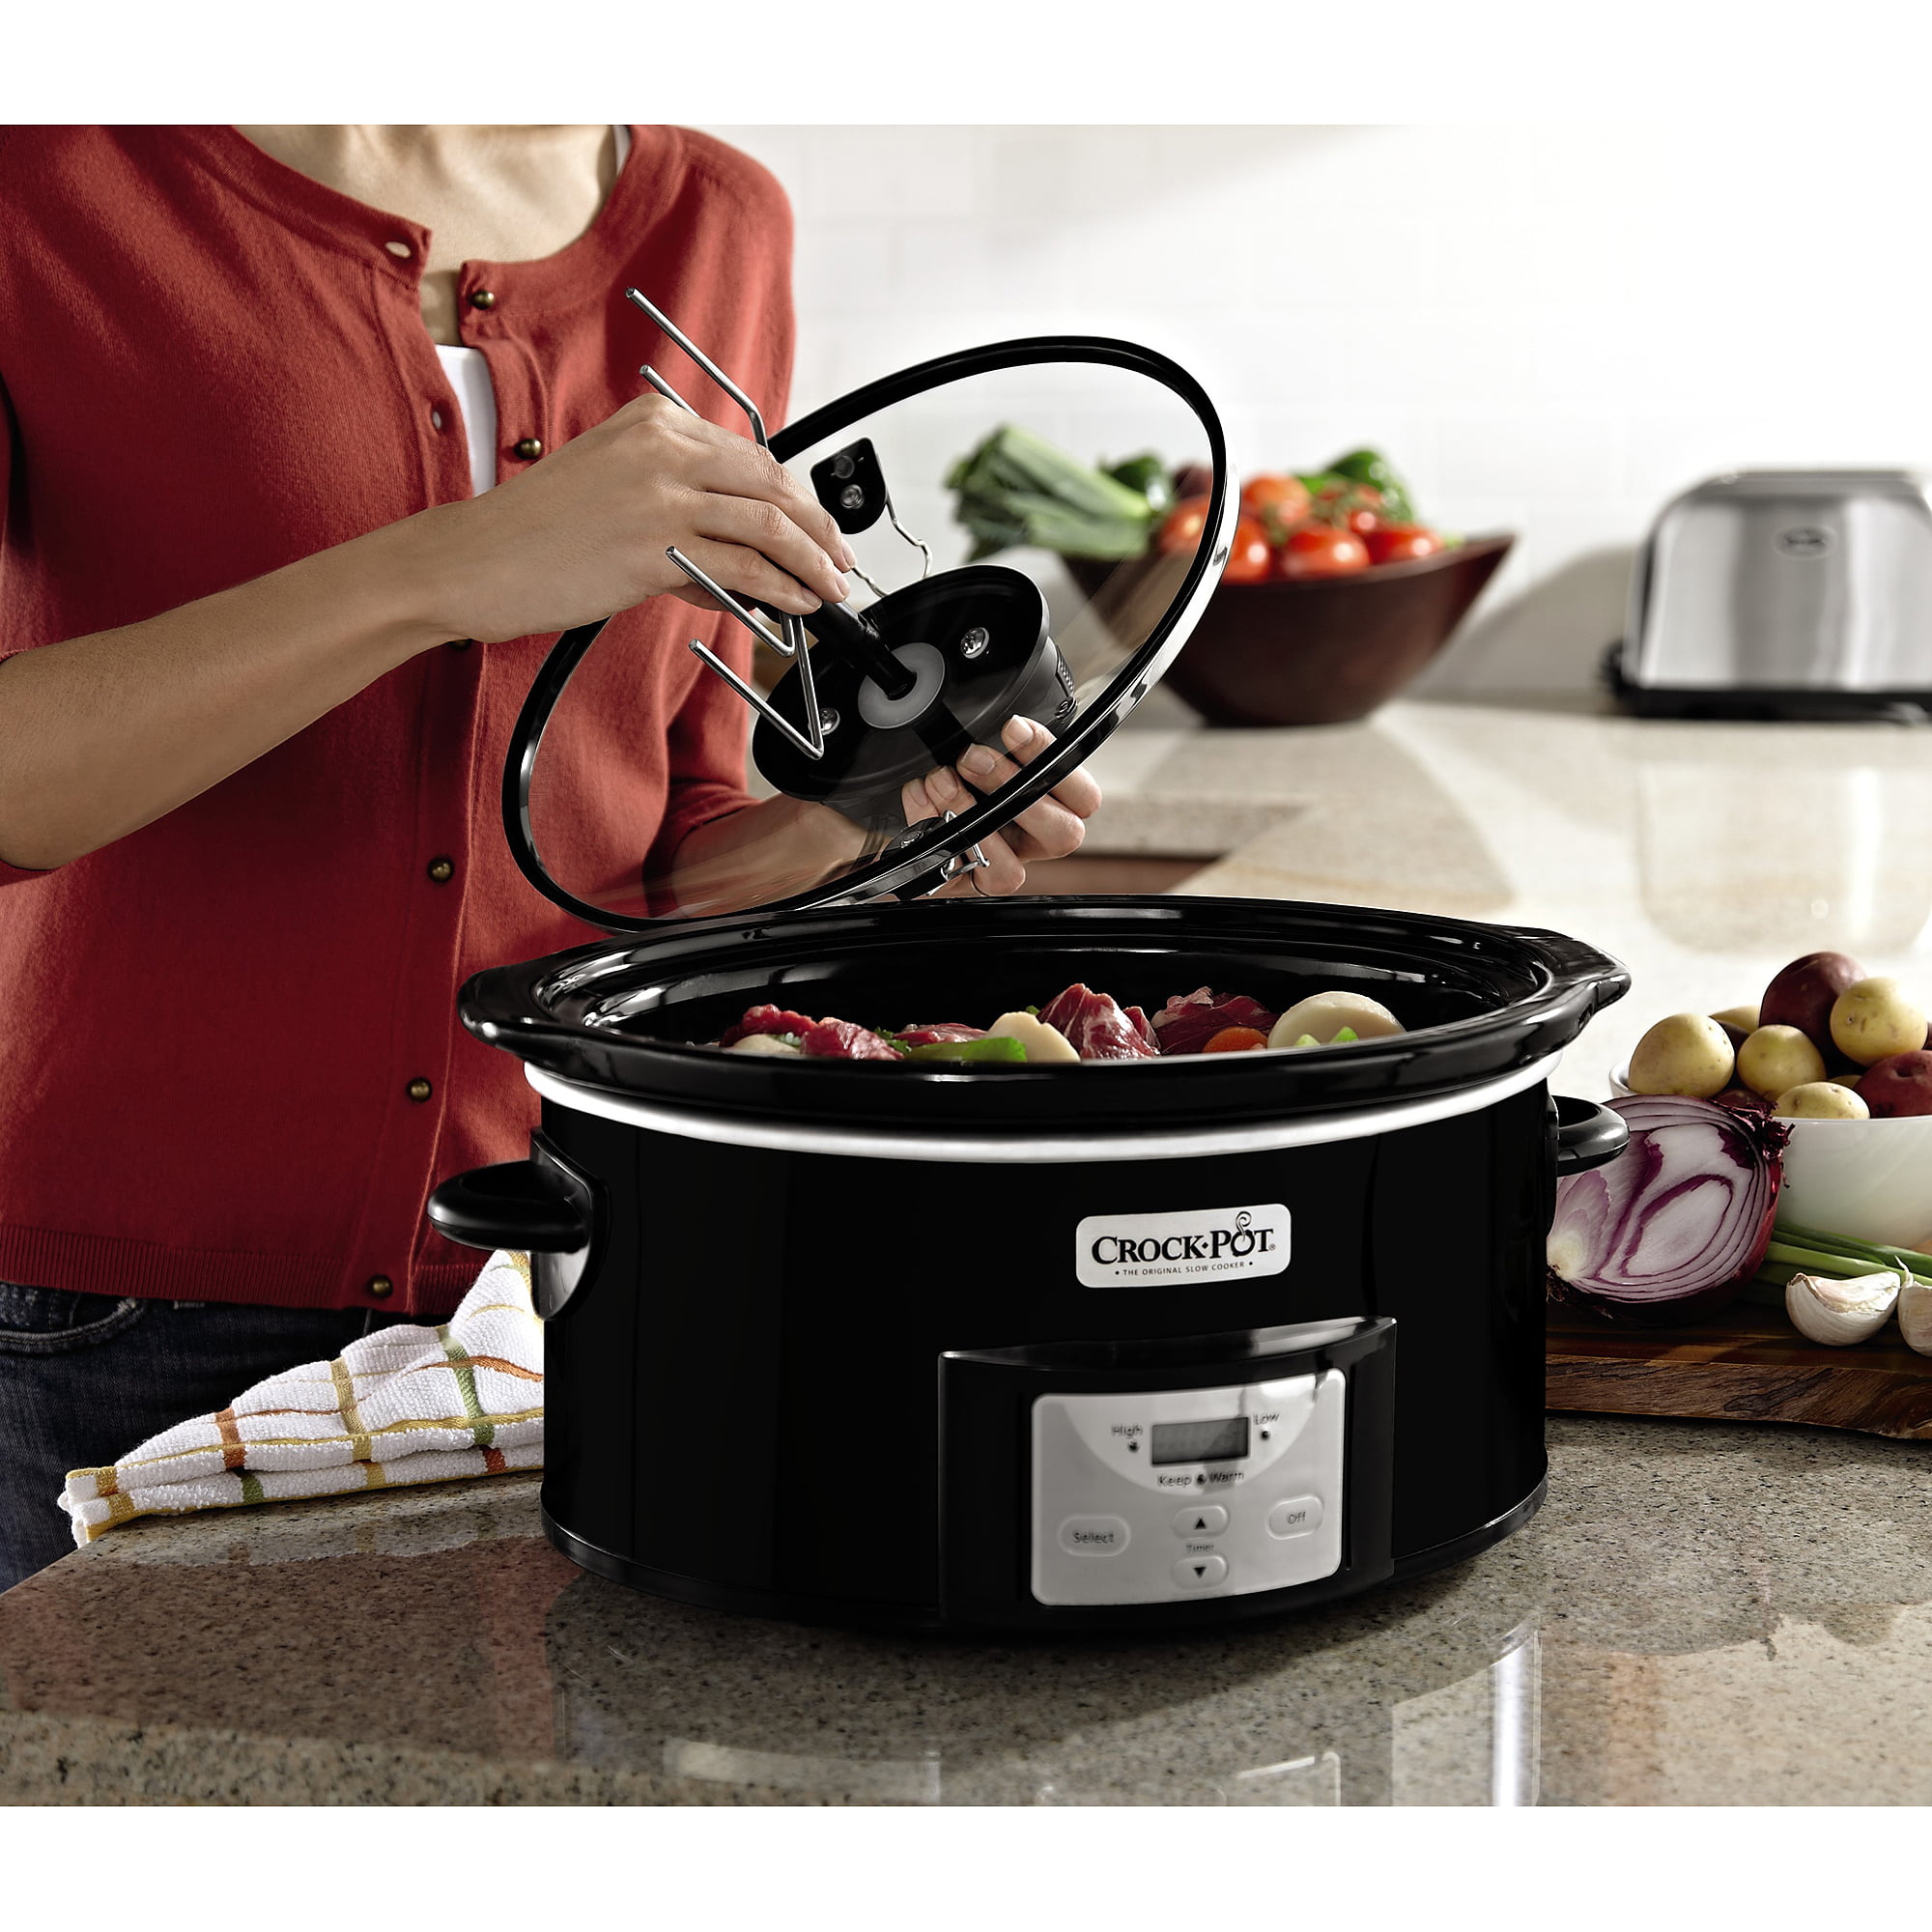 MEEDEER Slow Cooker White, Small Slow cooker 1QT, Smart Appointment,  Ceramic Interior pot, Automatic Multi-function Rice Cooker, Elecric Stew,  Yogurt